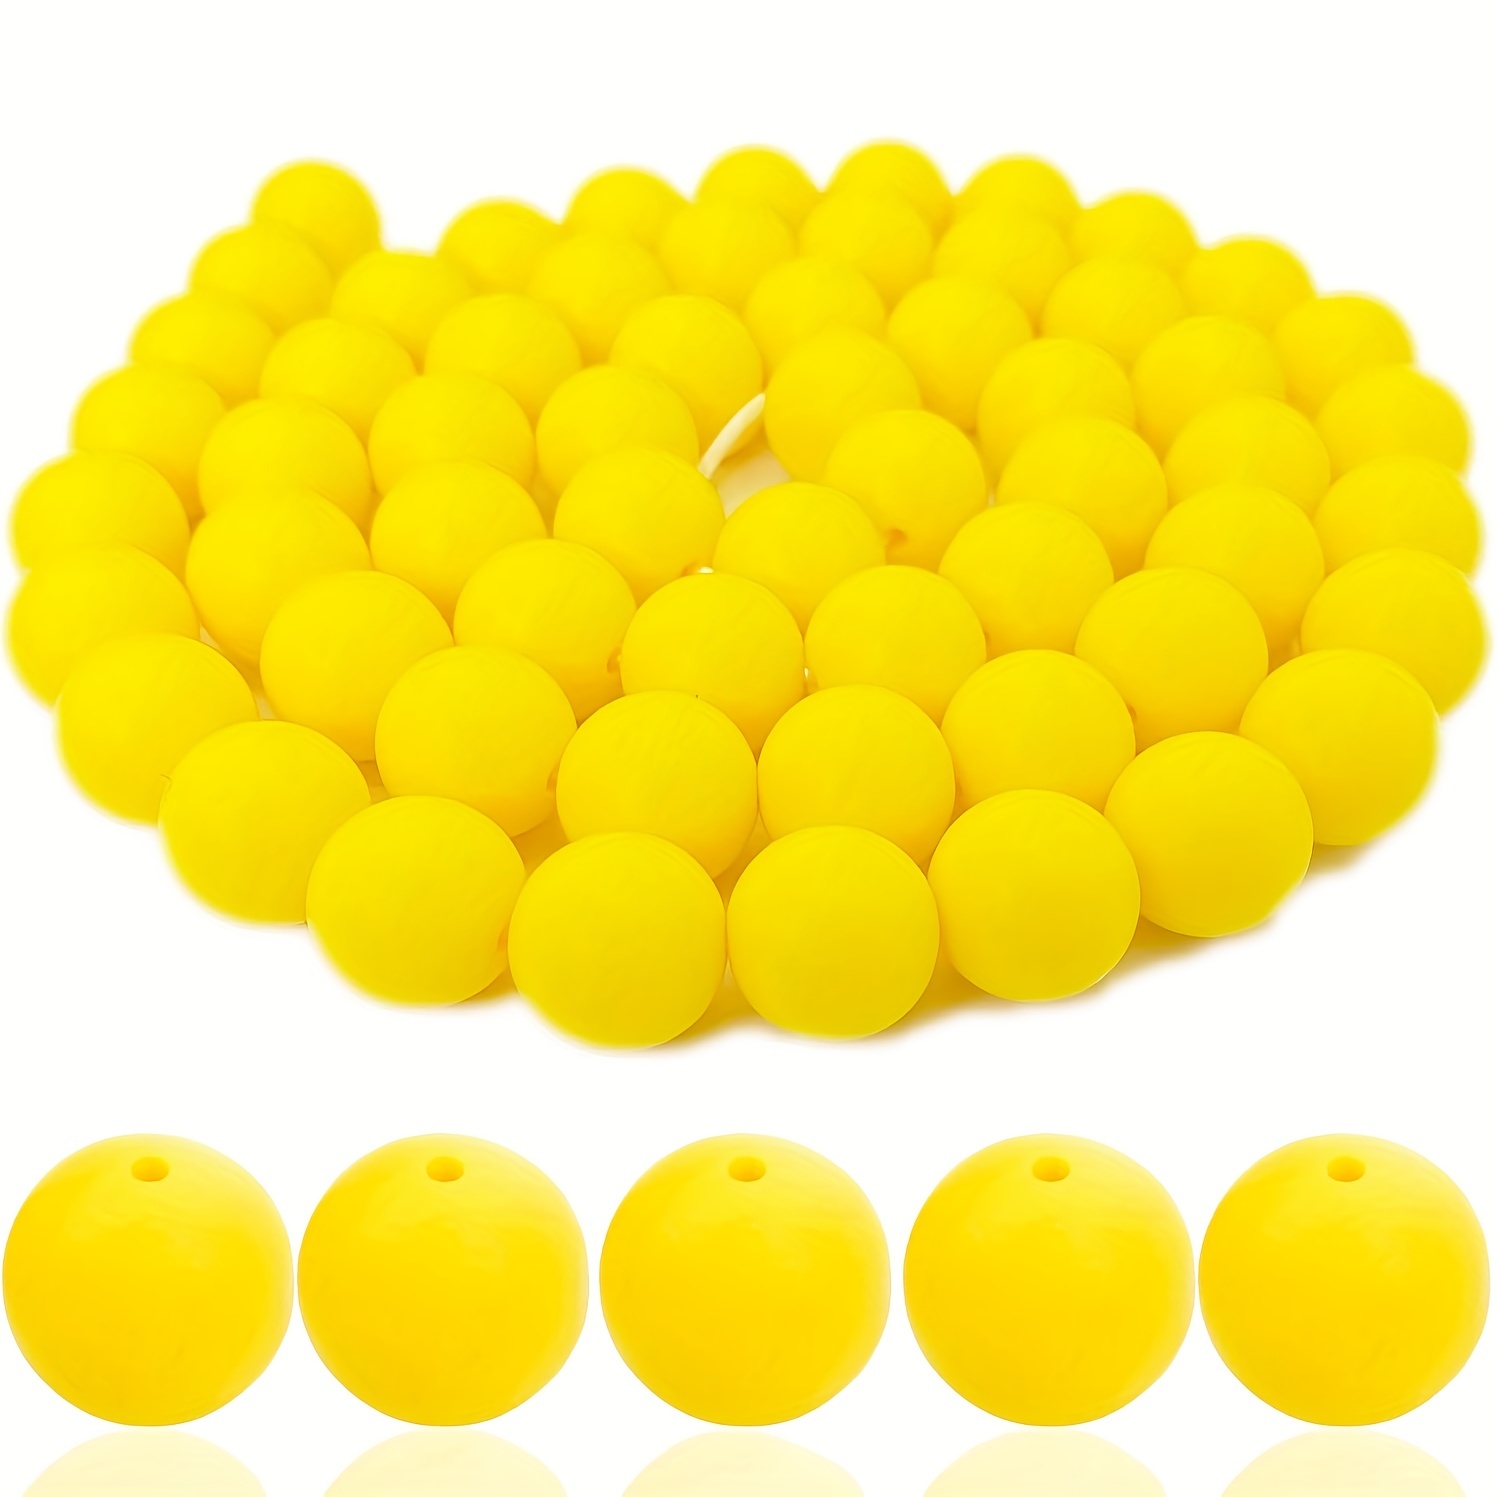 60pcs Silicone Beads, 15mm Silicone Beads Bulk Round Rubber Beads for Keychain Making Kit Silicone Focal Beads Loose Beads for Necklace Bracelet